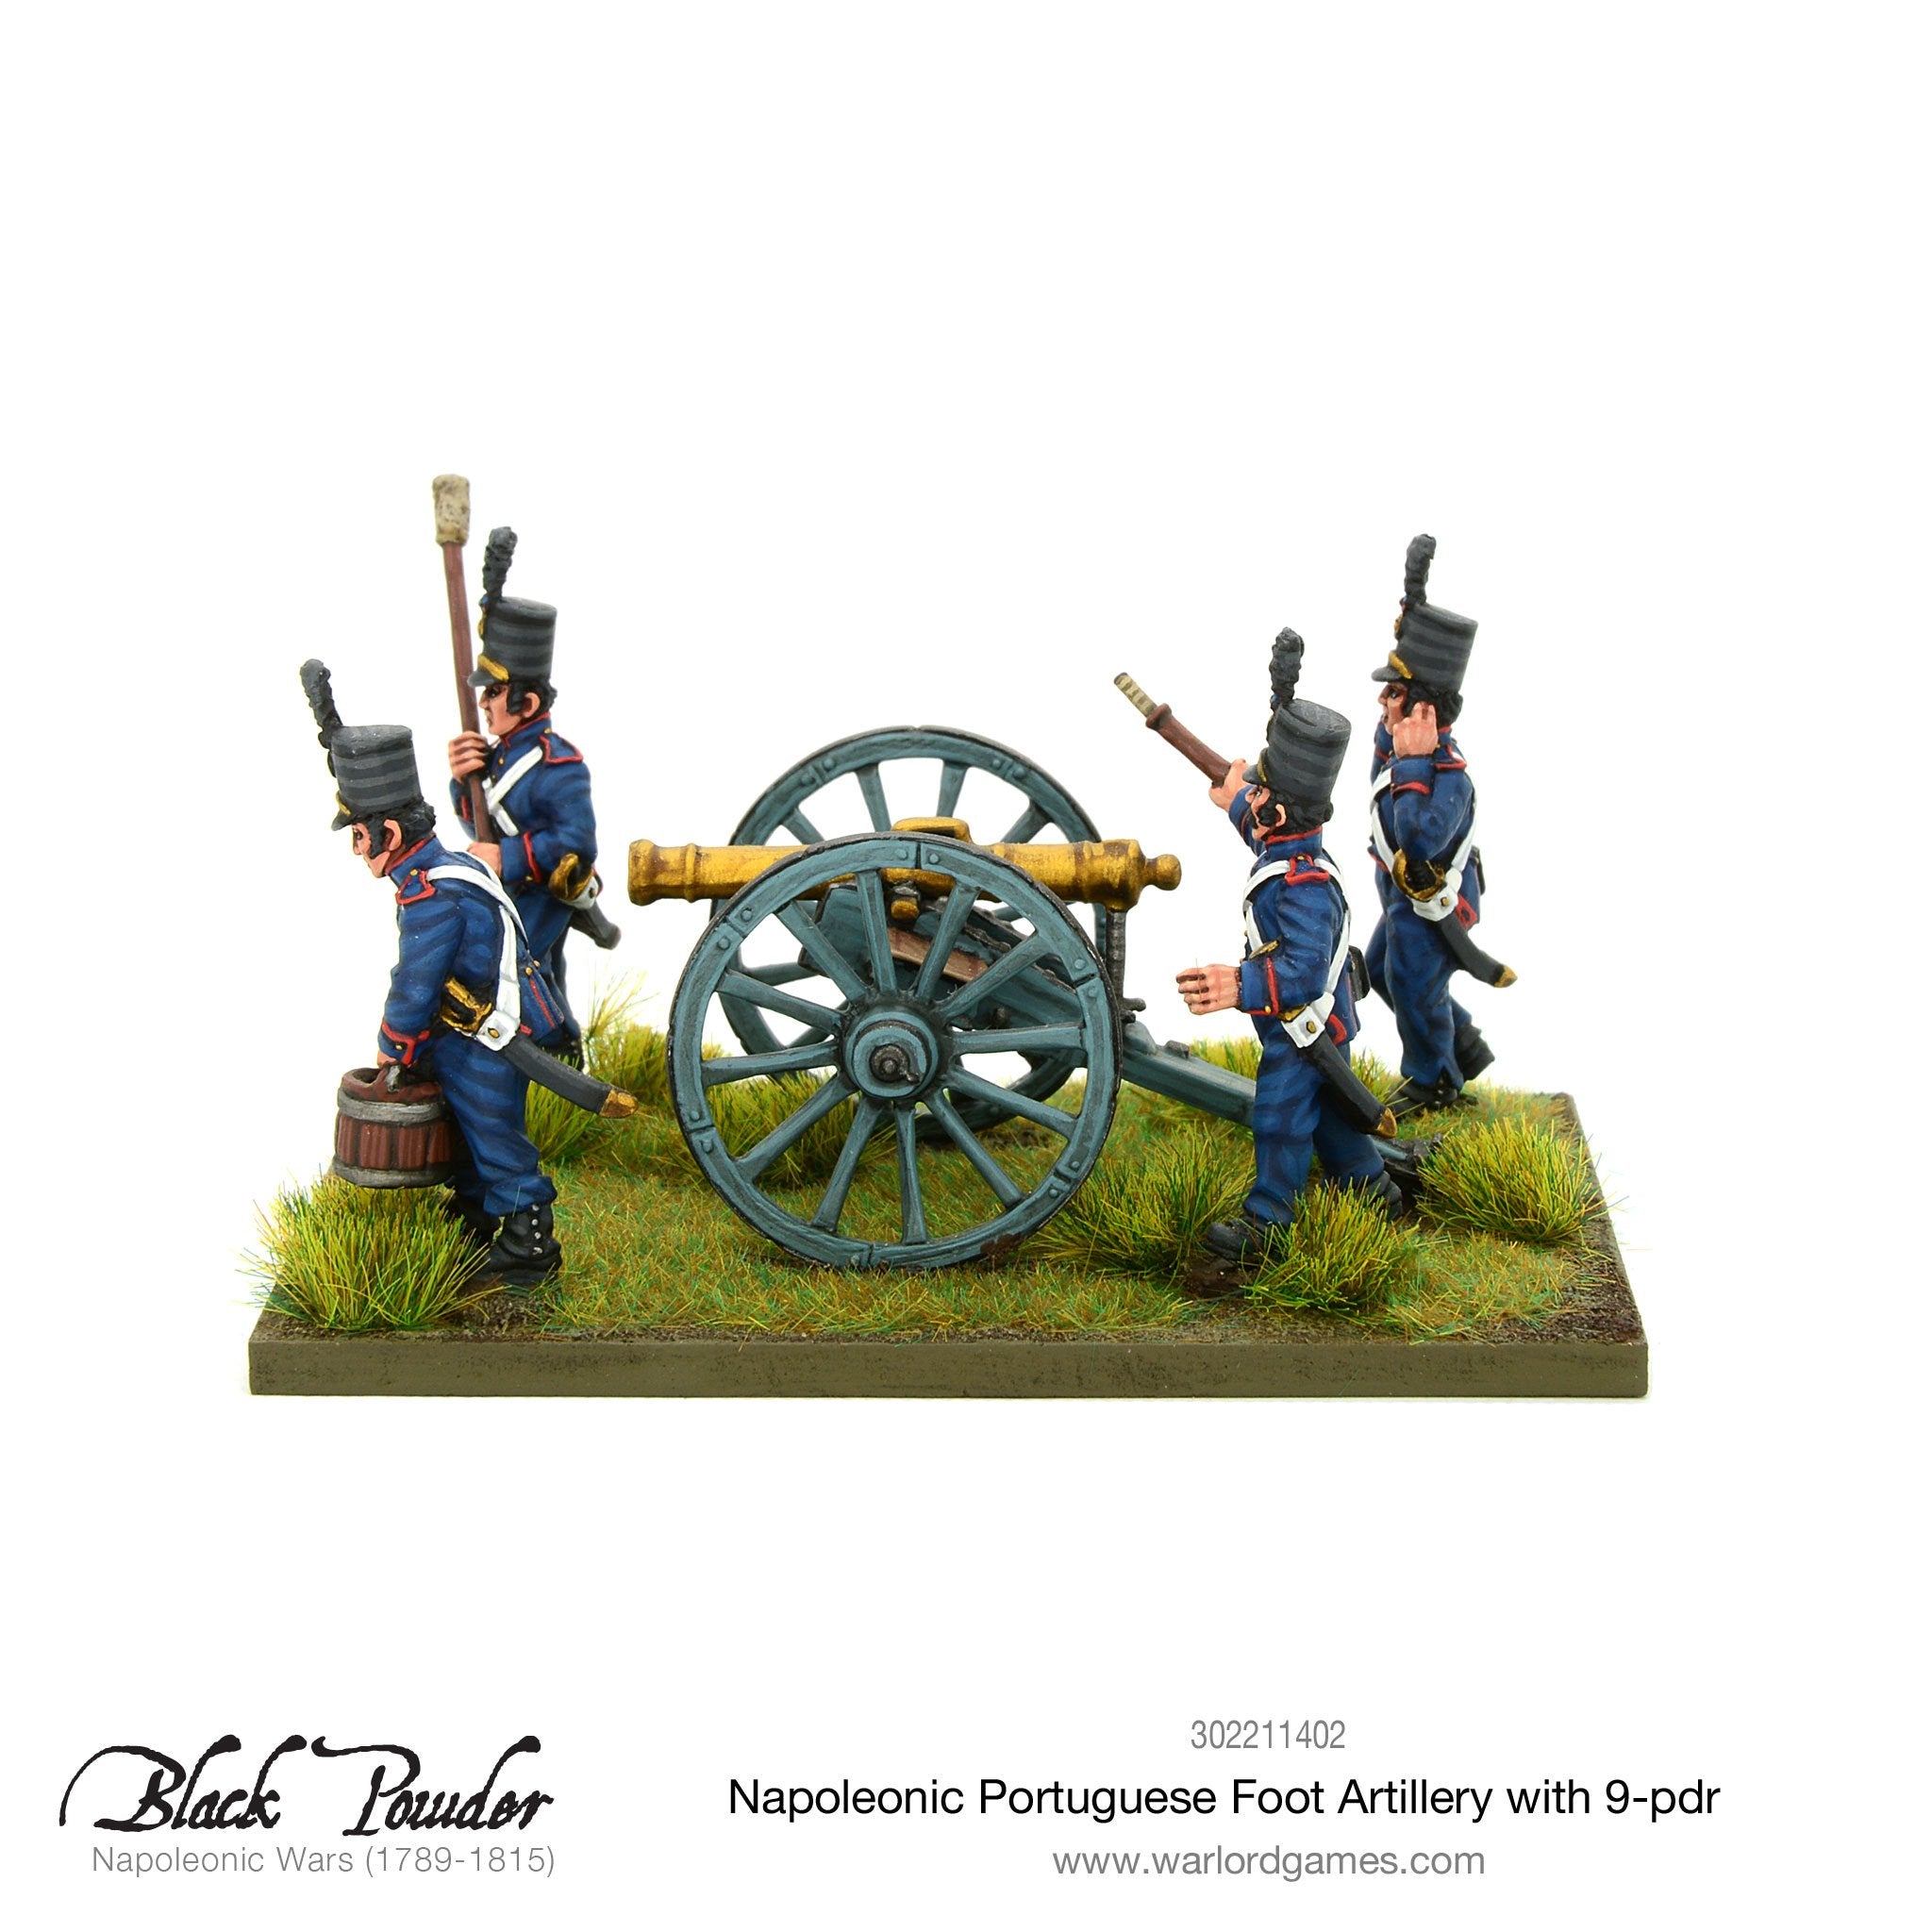 Napoleonic Portuguese Foot Artillery with 9-pdr